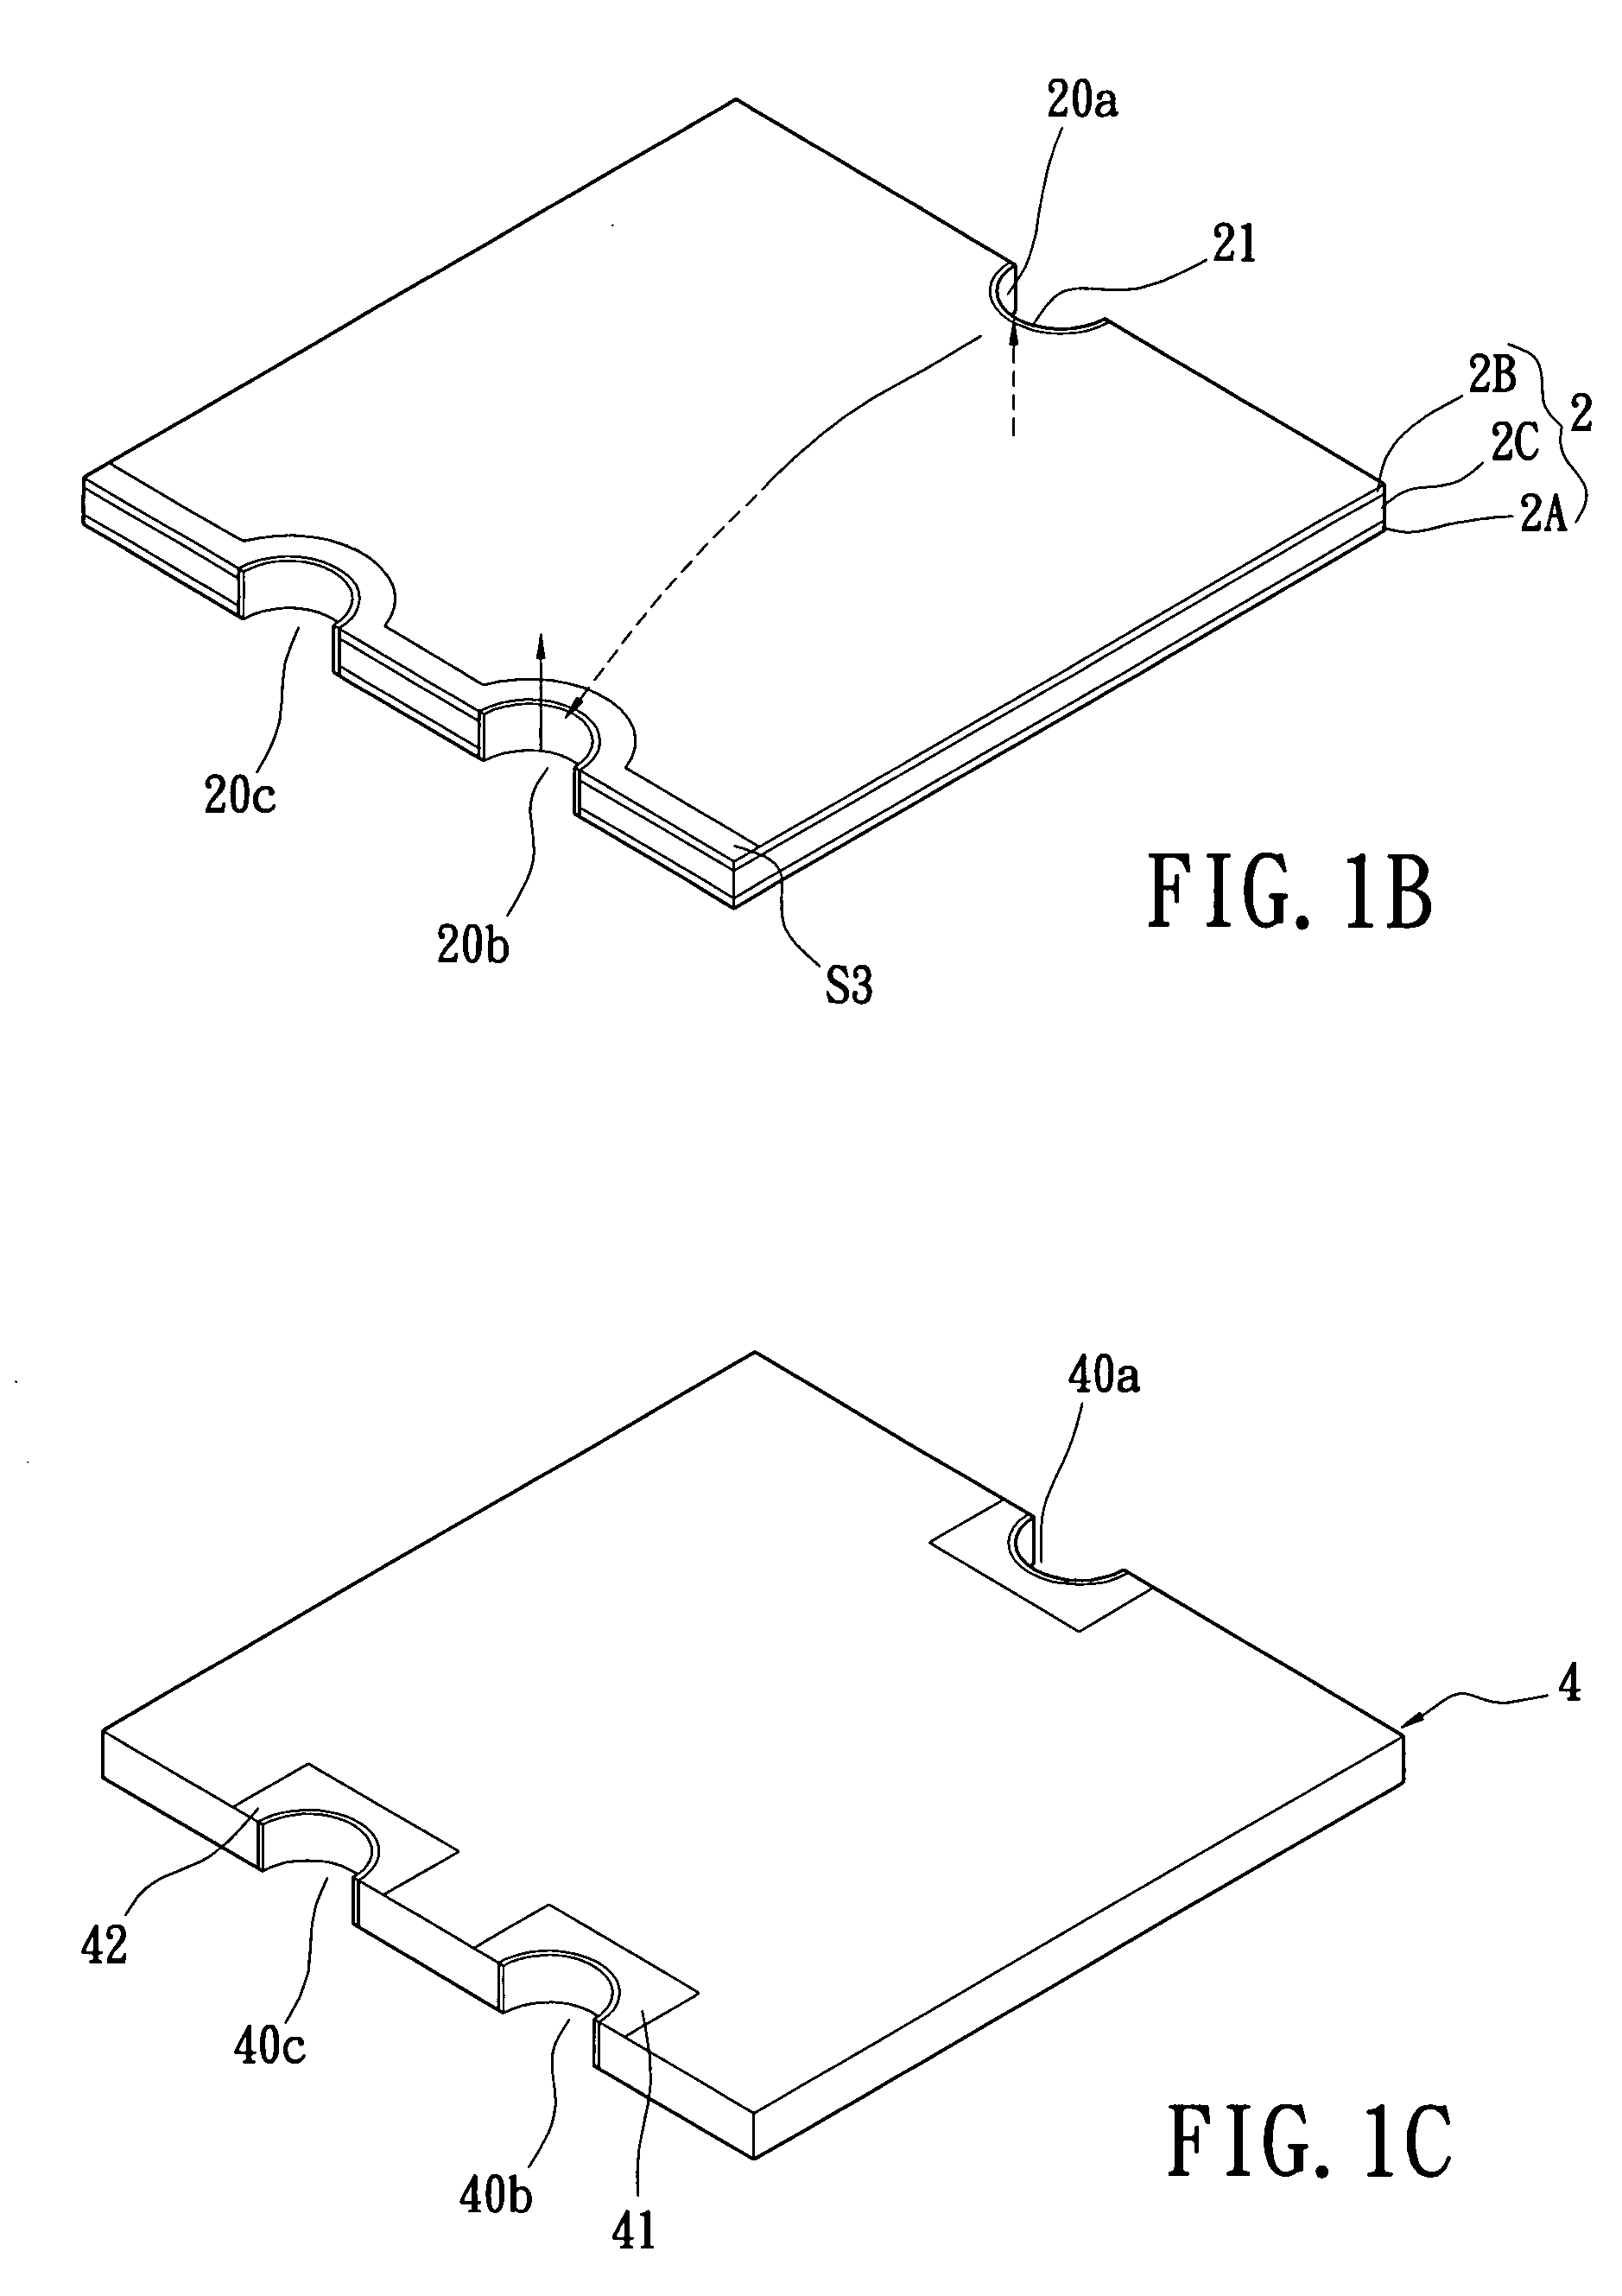 Embedded type multifunctional integrated structure and method for manufacturing the same